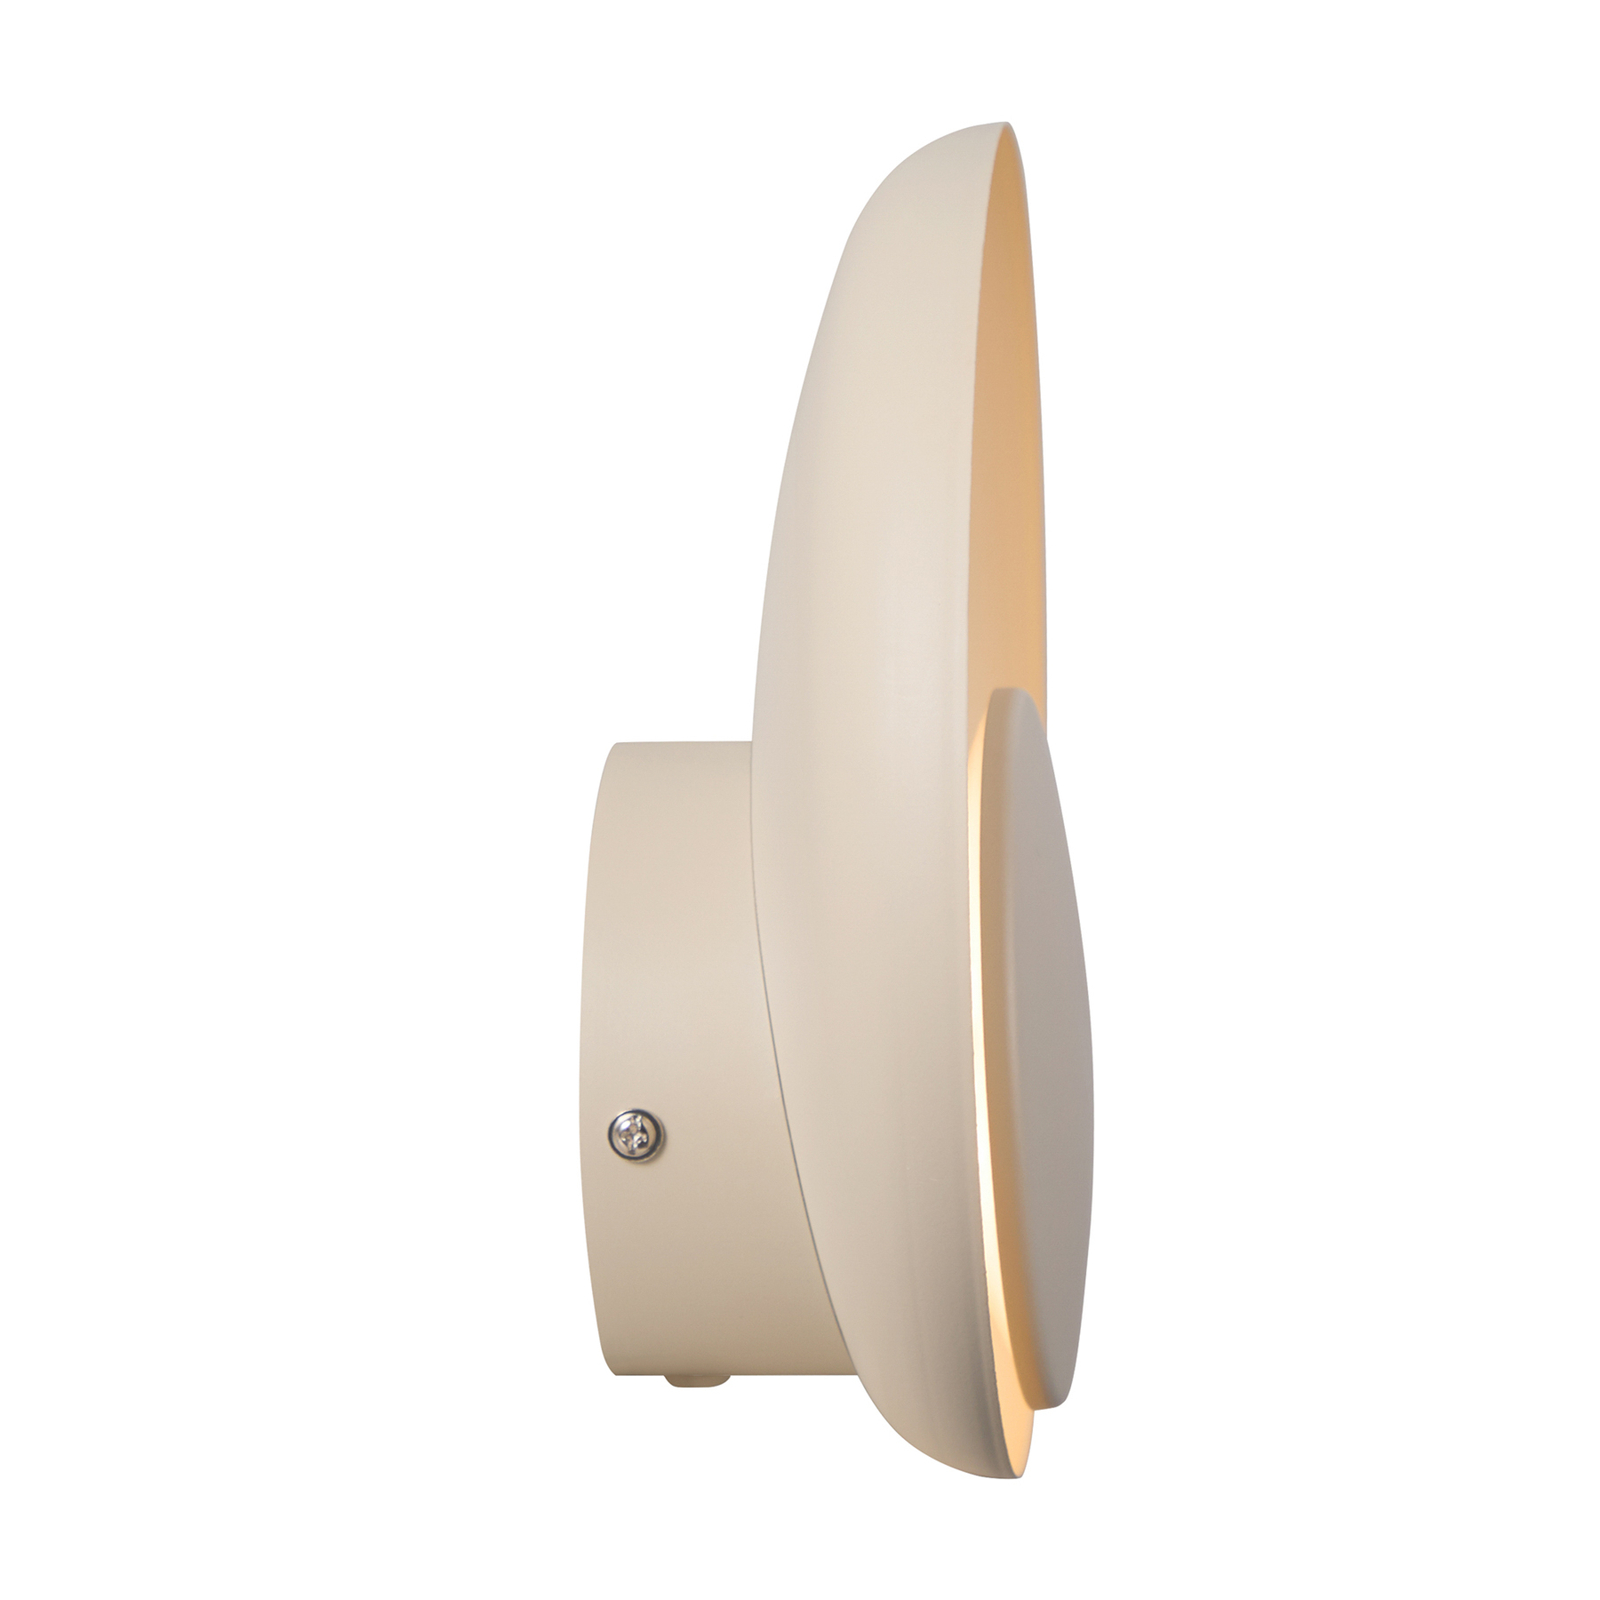 Marsi LED wall light with a cable/plug, beige